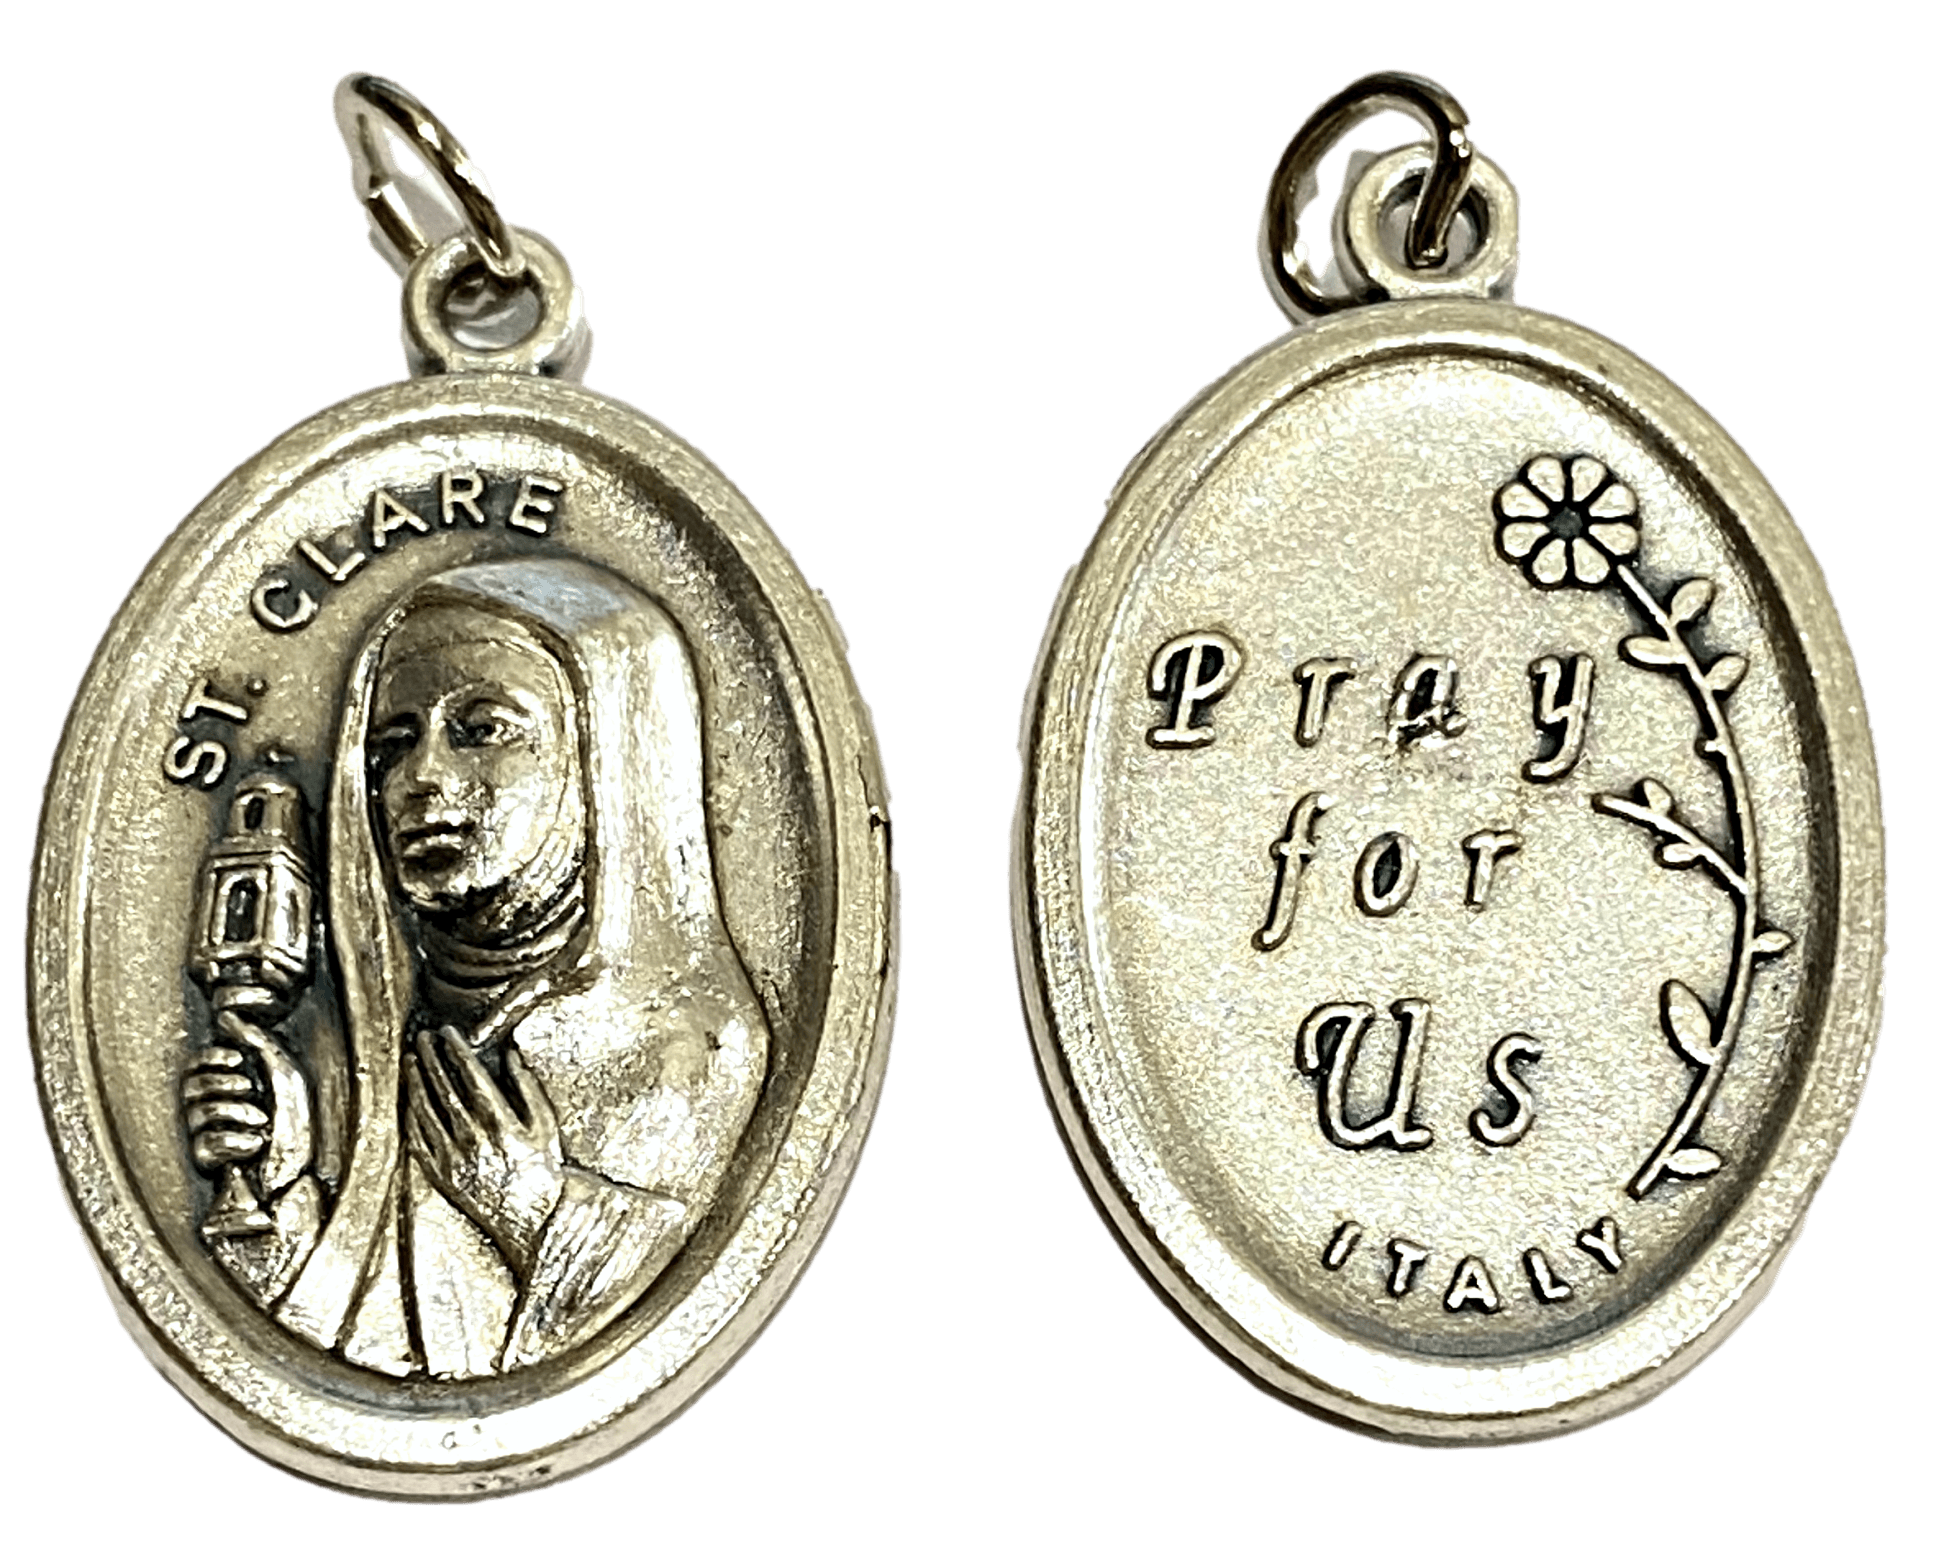 Medal Saint Clare Pray for Us Italian Double-Sided Silver Oxidized Metal Alloy 1 inch - Ysleta Mission Gift Shop- VOTED El Paso's Best Gift Shop